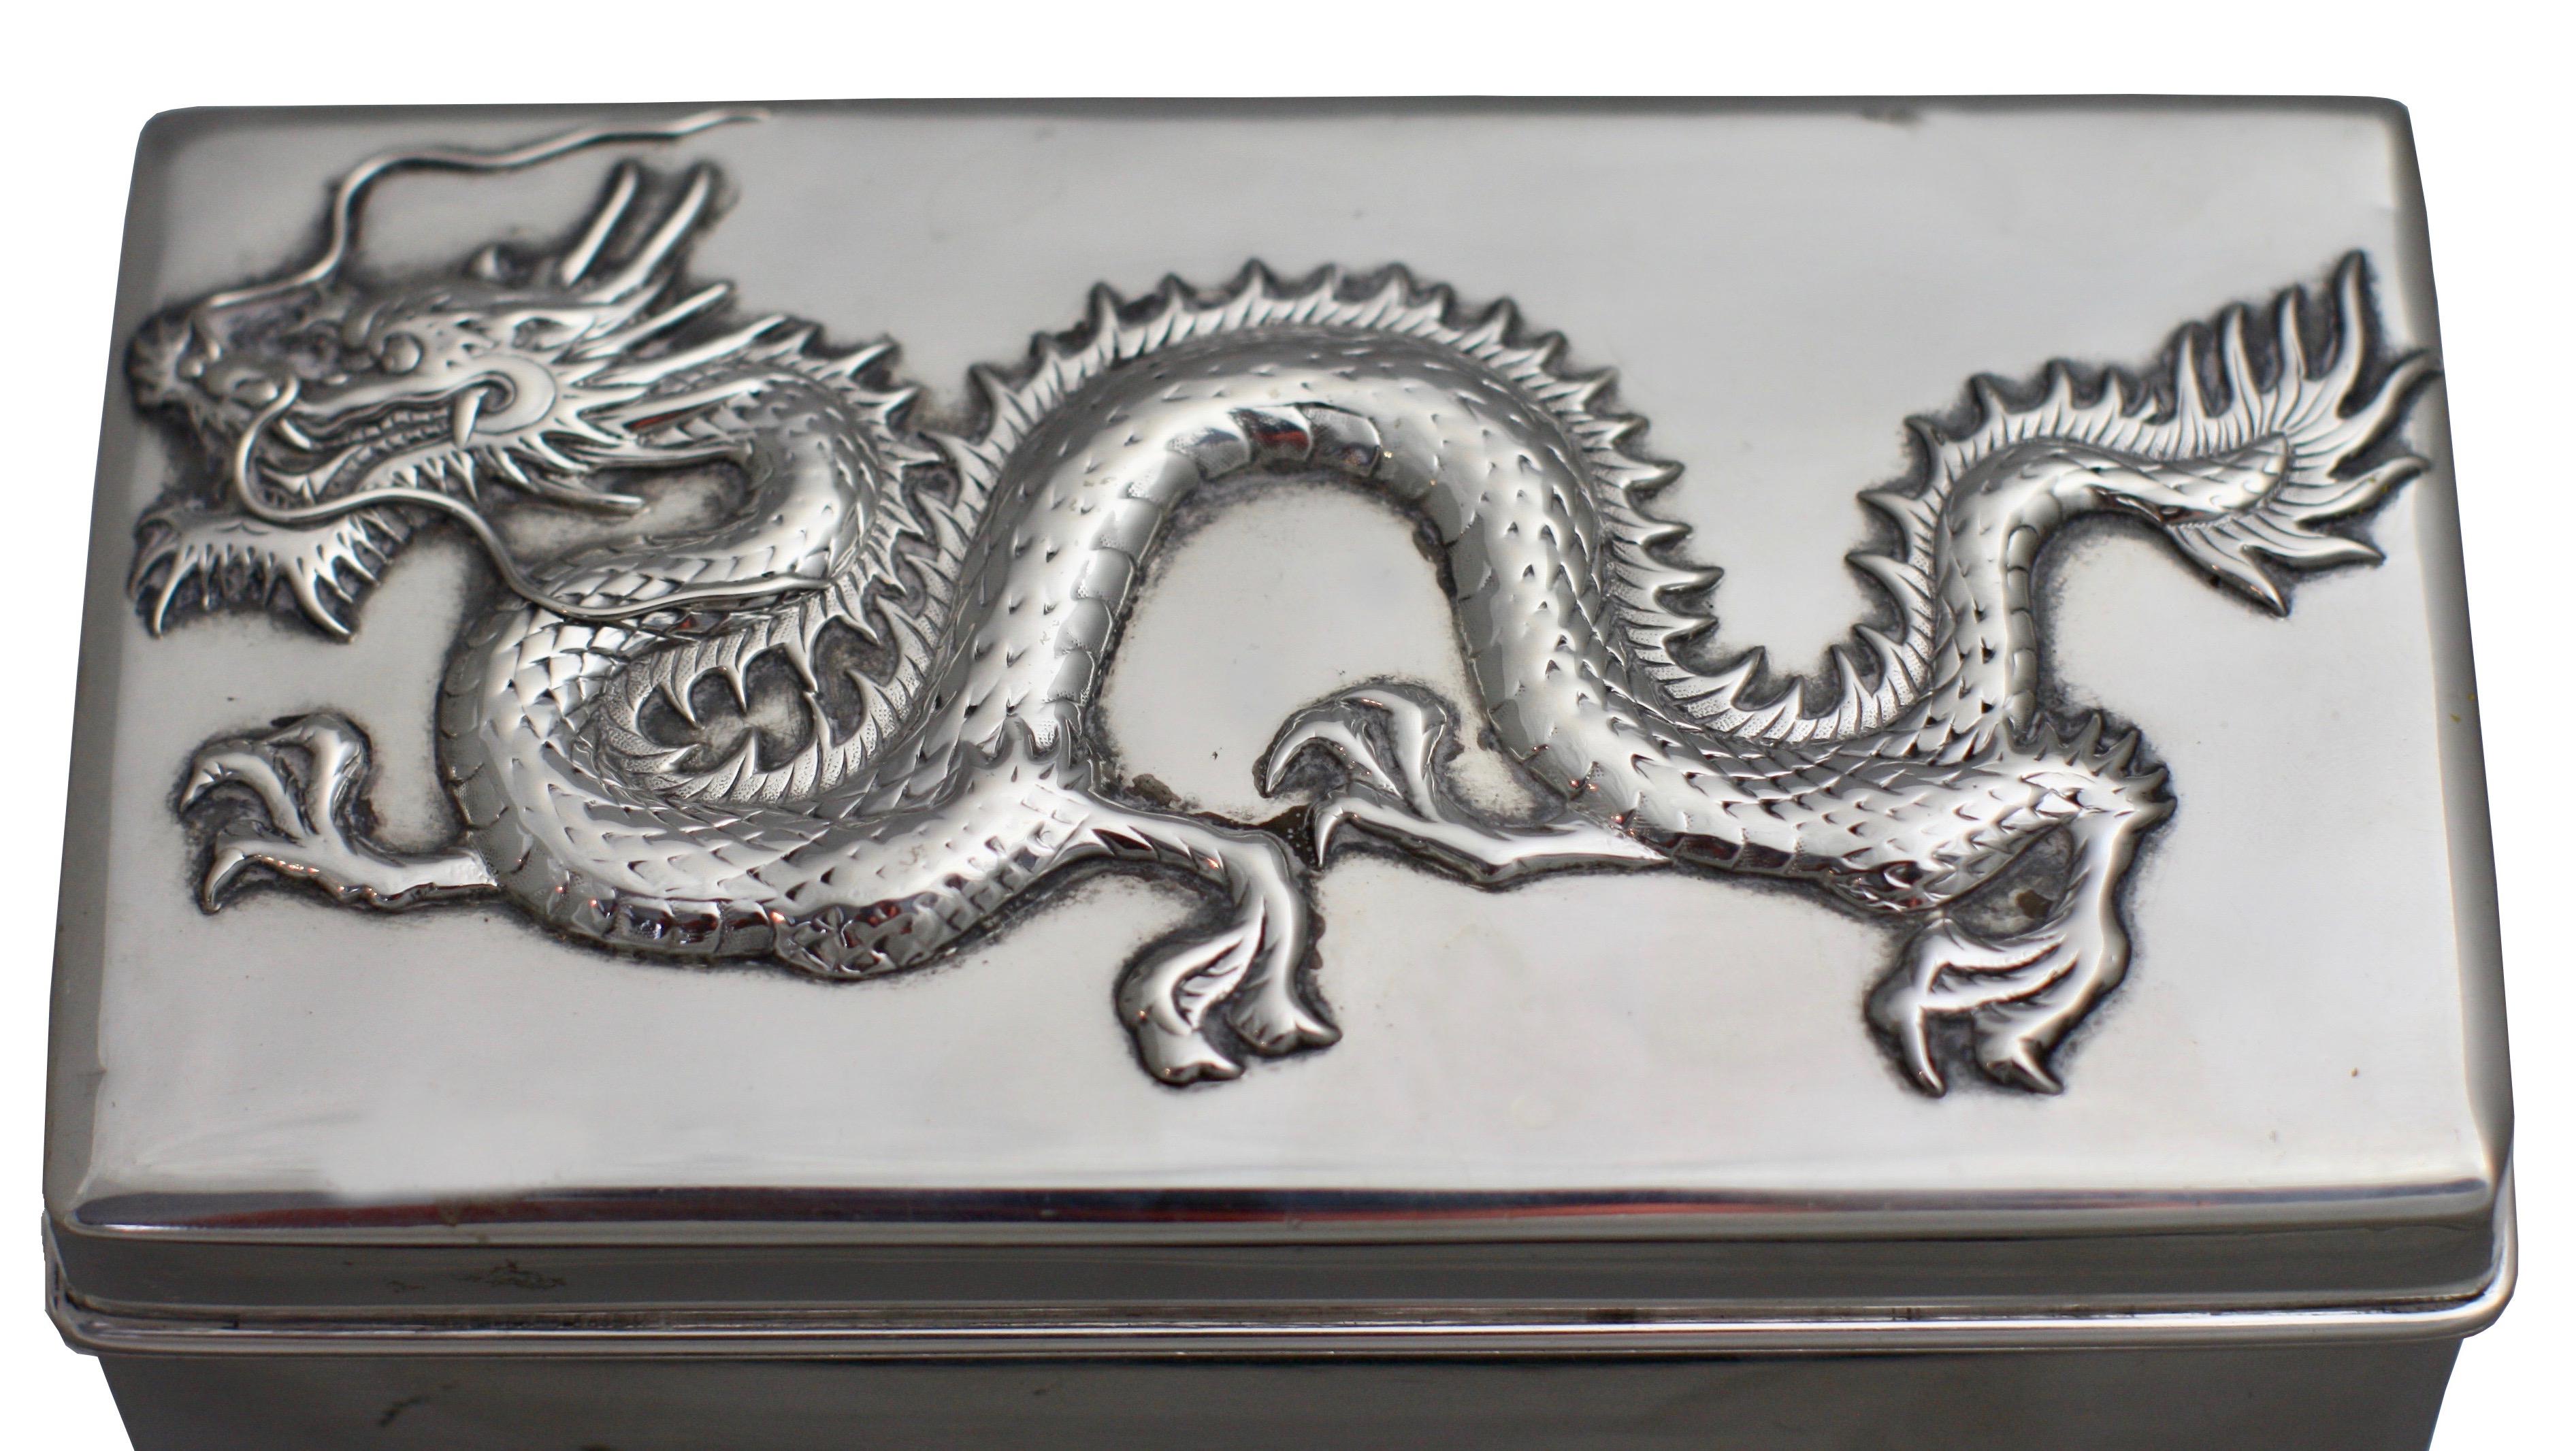 Chinese sterling silver box and cover,
circa 1900, hallmarked and Stamped WH90,
of rectangular form, the hinged cover decorated with an applied dragon, wood lined.
Measures: Length 6 in. (15.24 cm.)
Width 6 1/2 in. (16.51 cm.)
Depth 3 1/2 in.